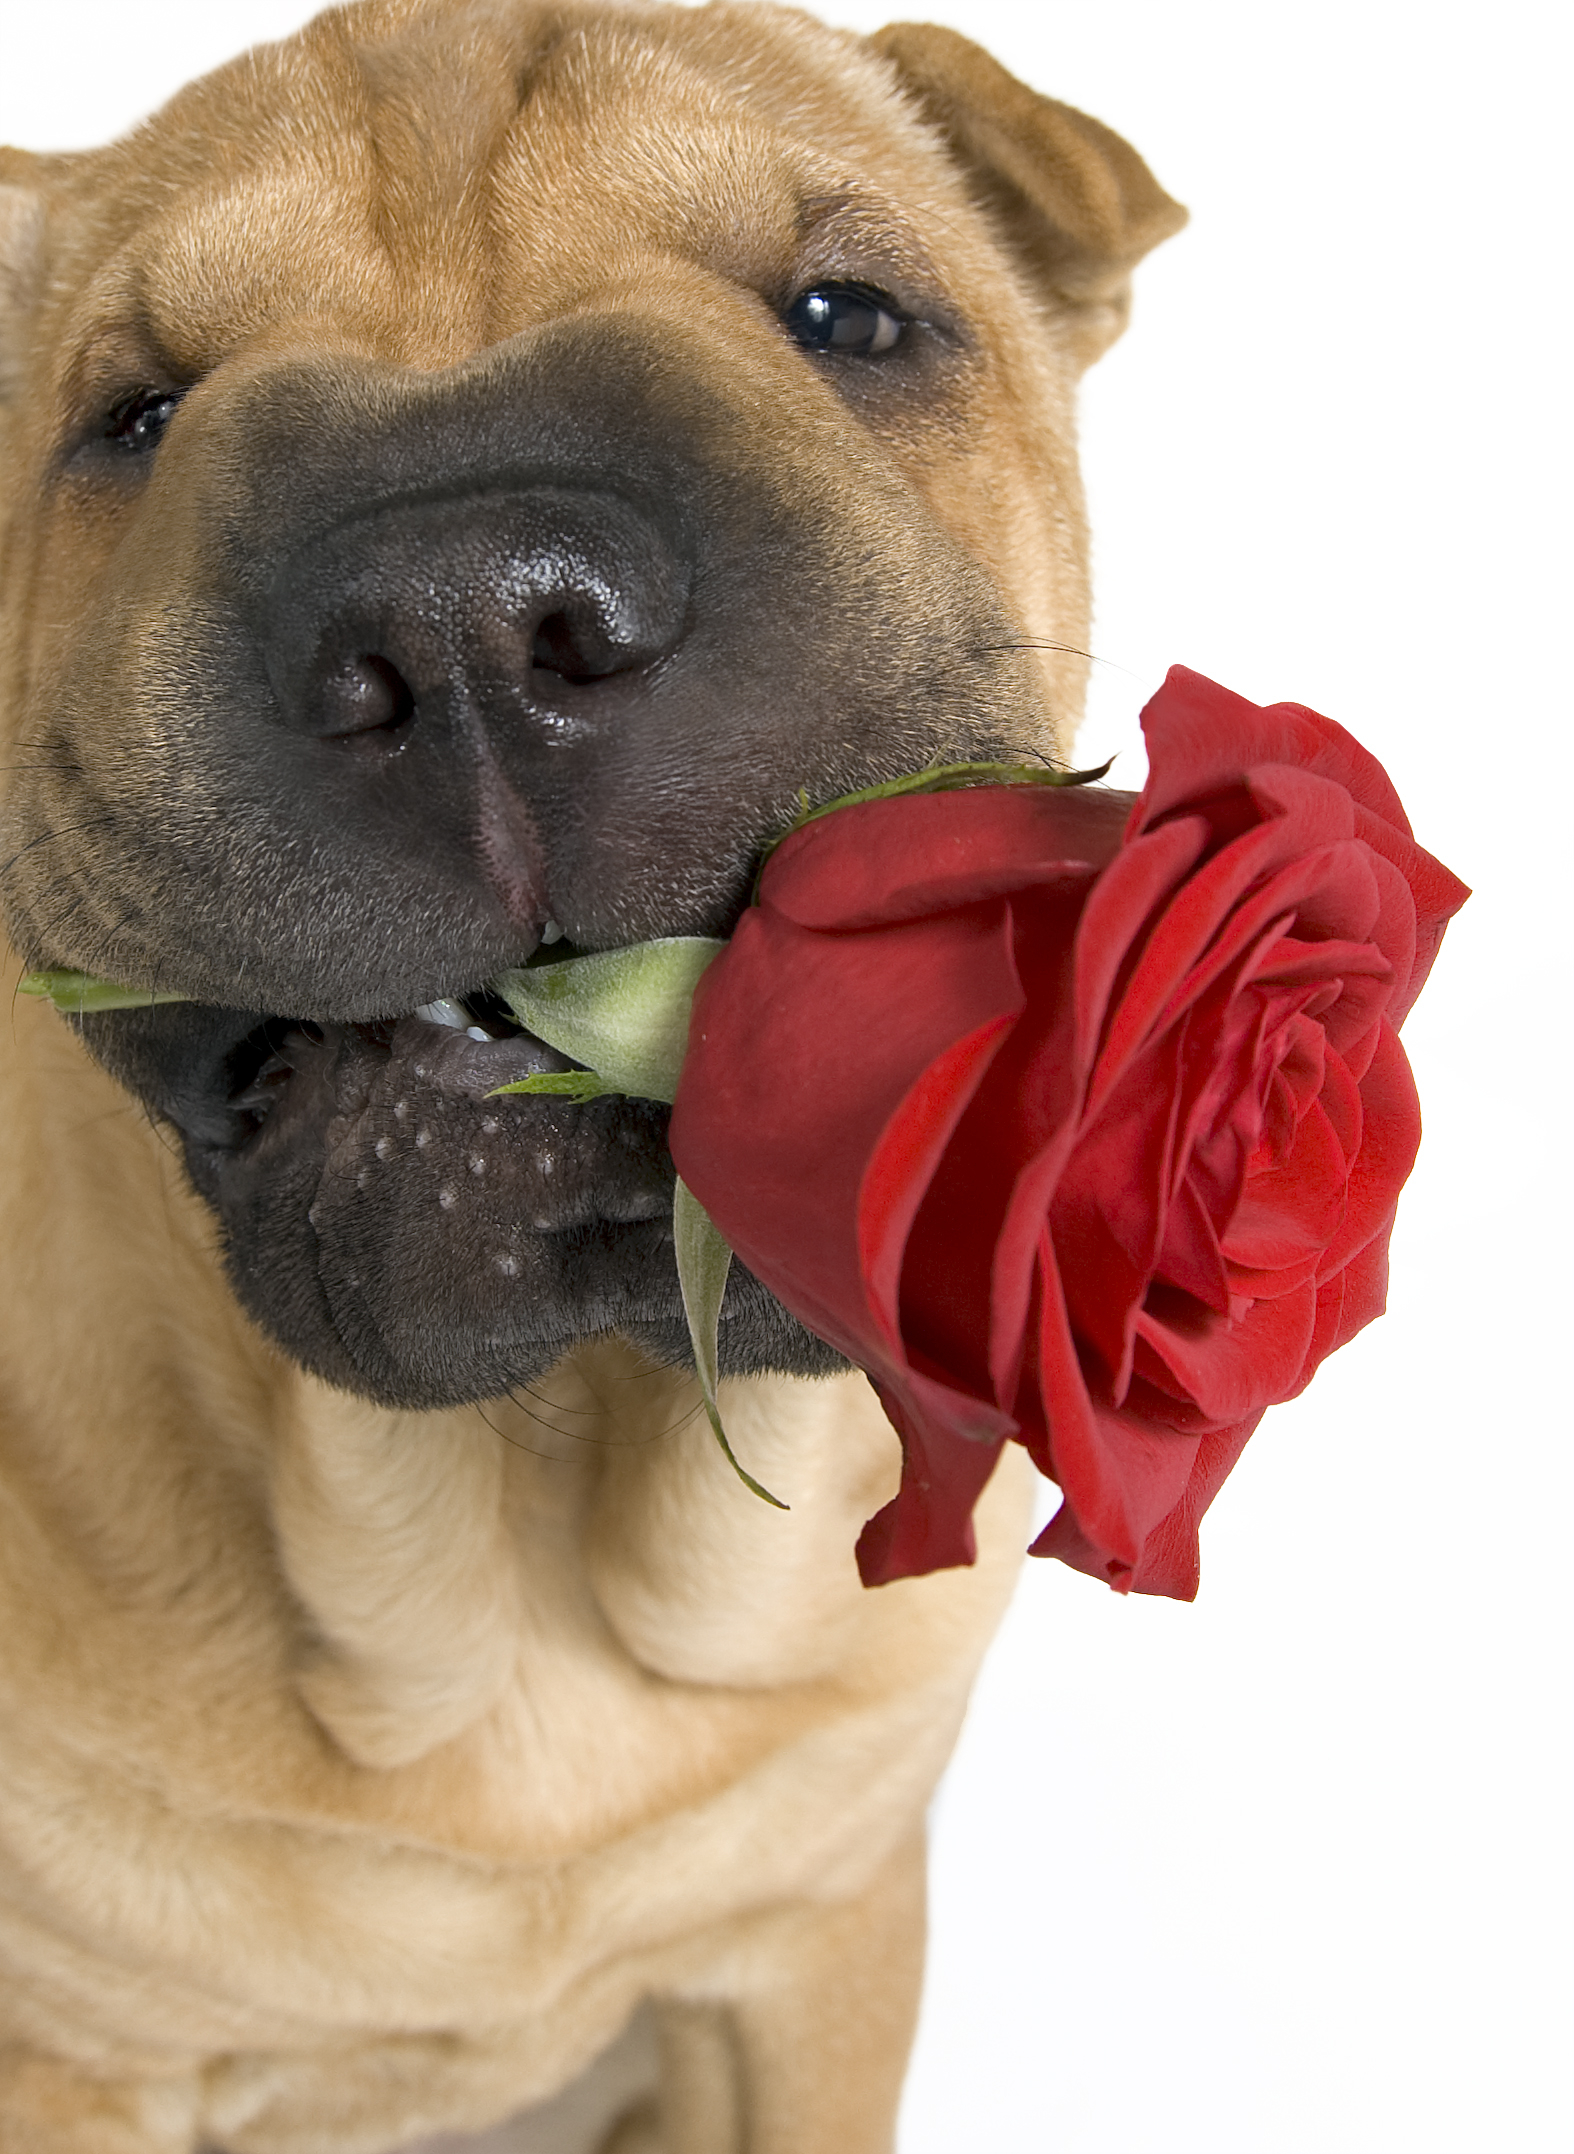 Shar Pei Dog With Cute Rose Wallpaper - Cute Valentines Day Dogs - HD Wallpaper 